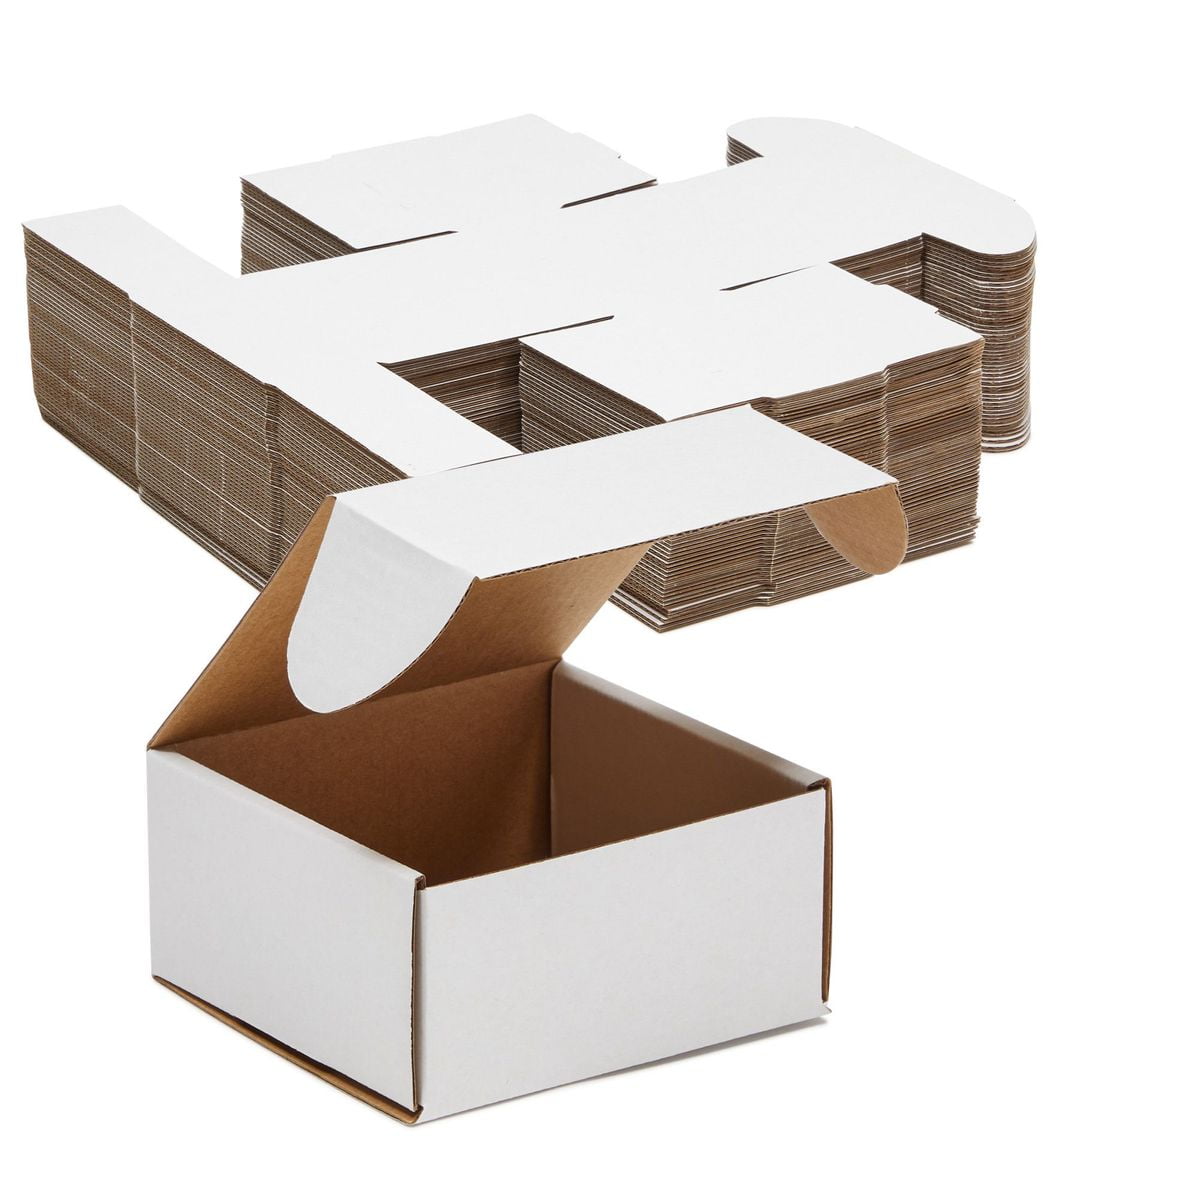 Corrugated Paper Boxes 6 x 4 x 2 inches Small Shipping Boxes 50 Pack White 